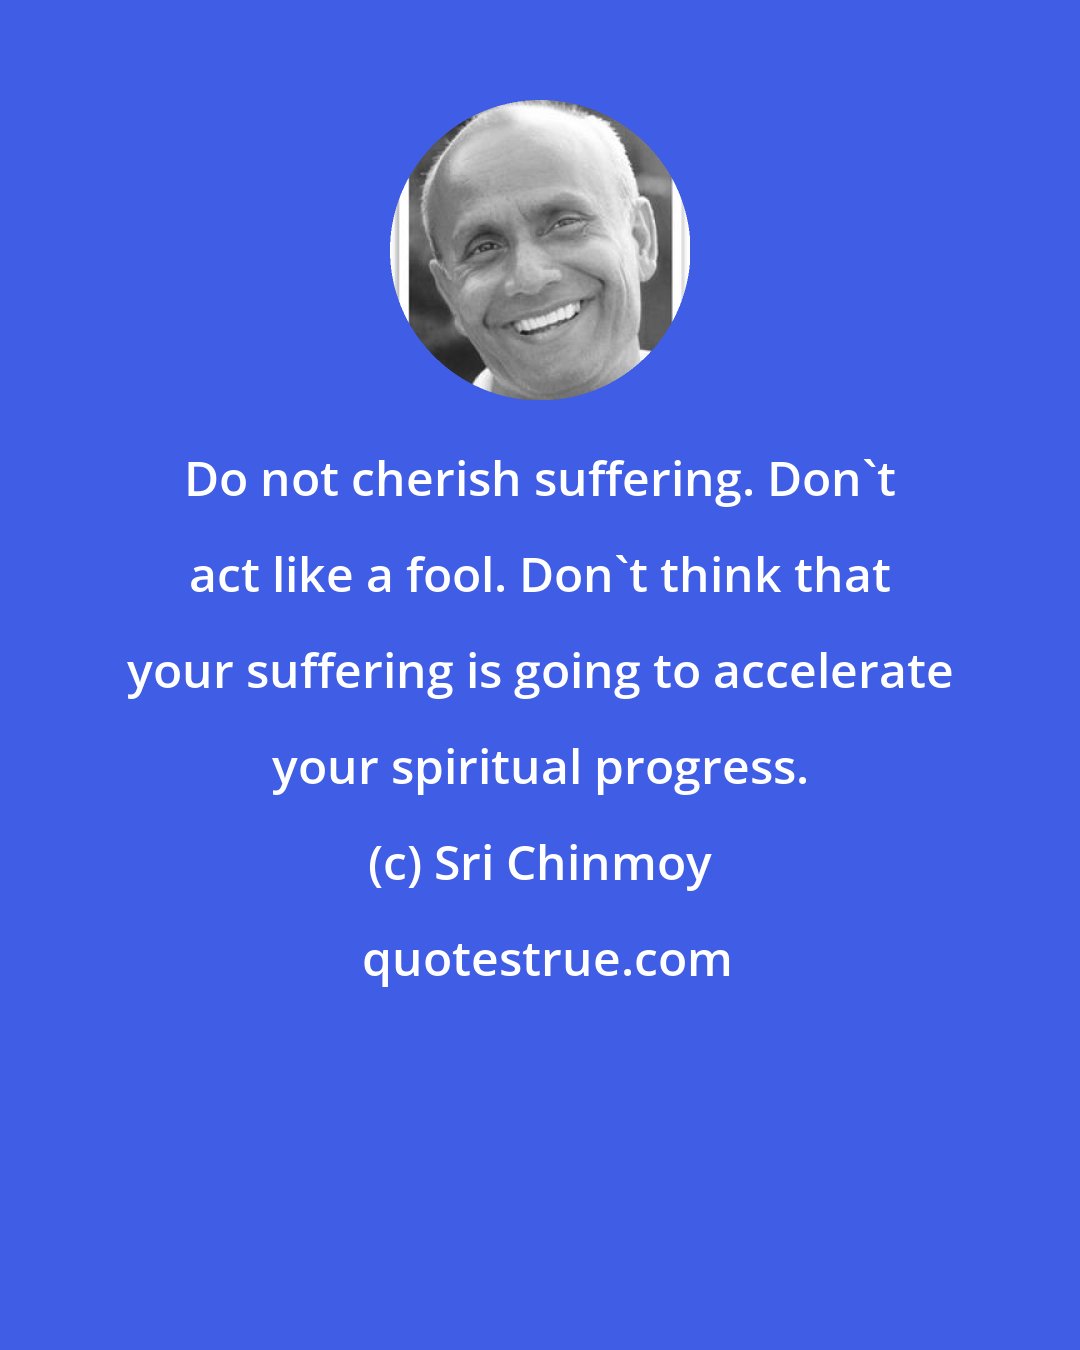 Sri Chinmoy: Do not cherish suffering. Don't act like a fool. Don't think that your suffering is going to accelerate your spiritual progress.